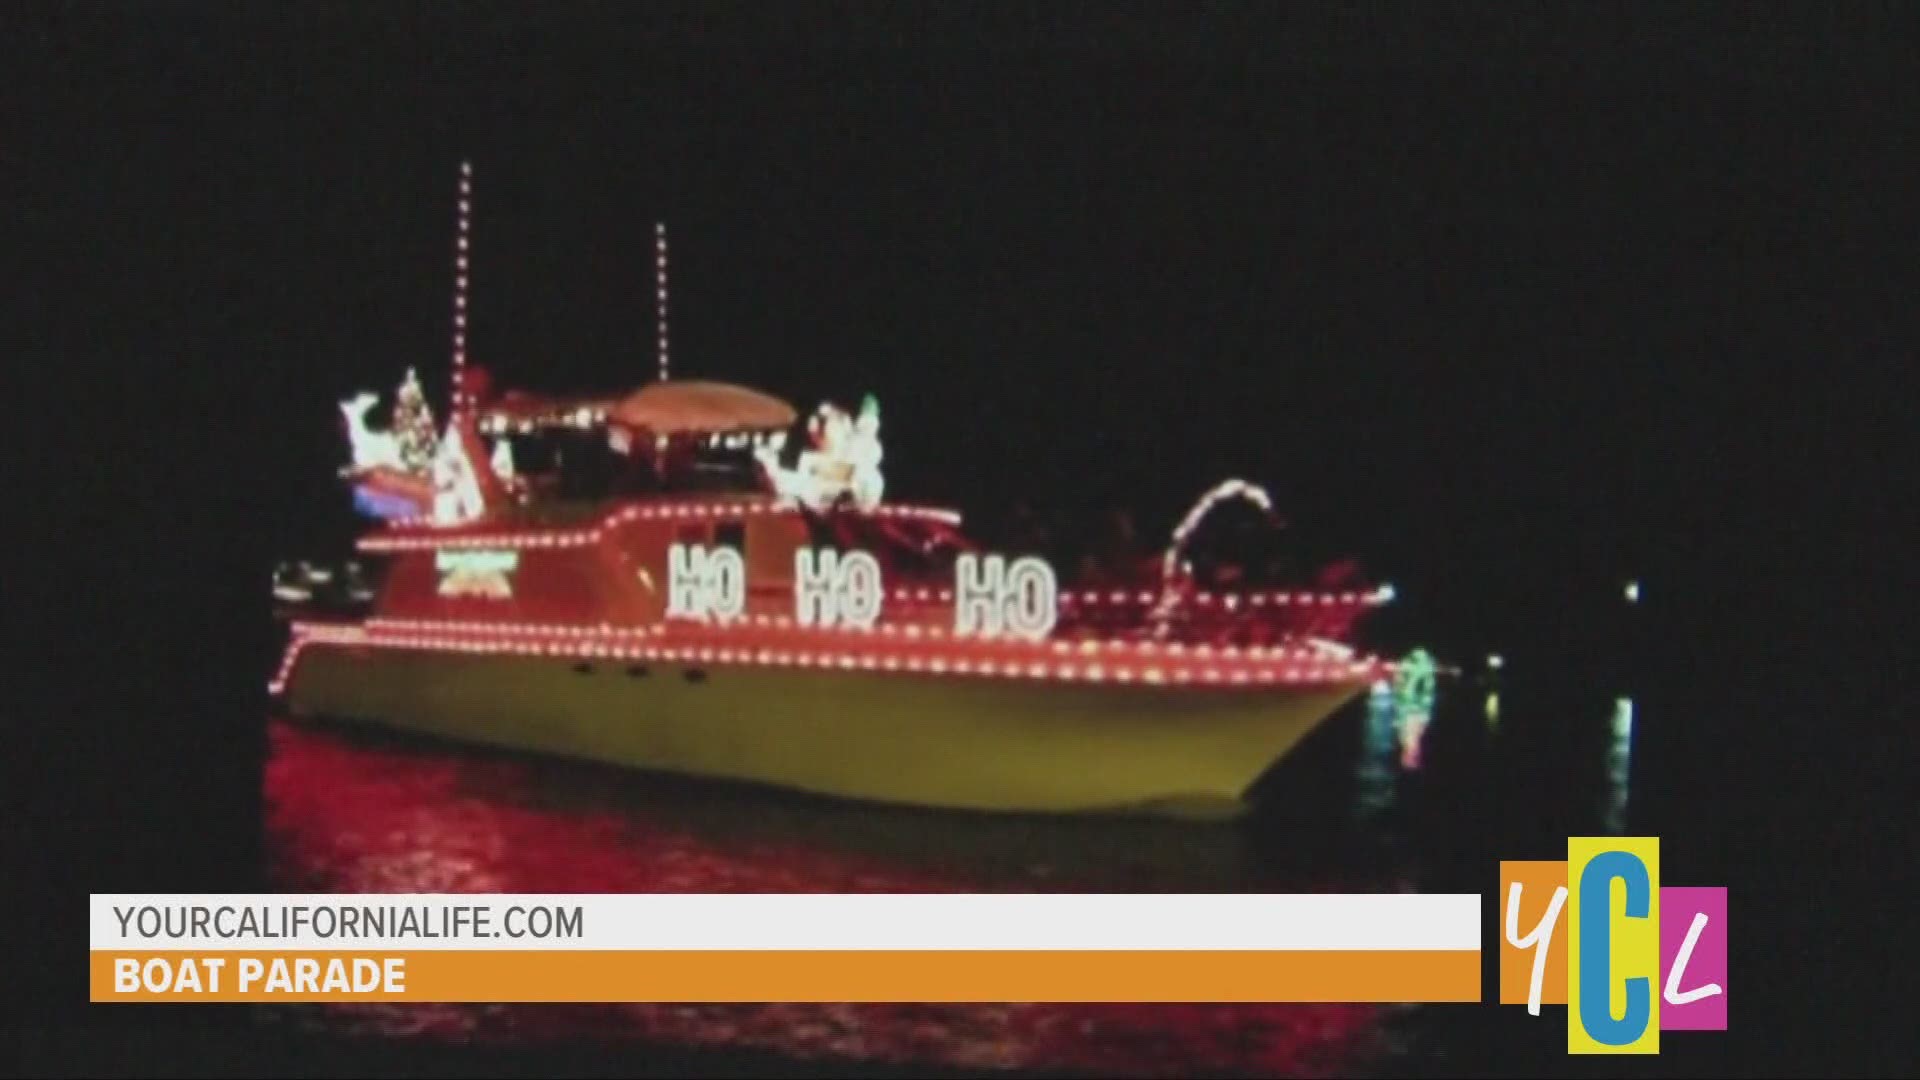 See lighted, decorated boats as they make their annual voyage through the San Joaquin Delta towards downtown Stockton to kick-off the holiday season!